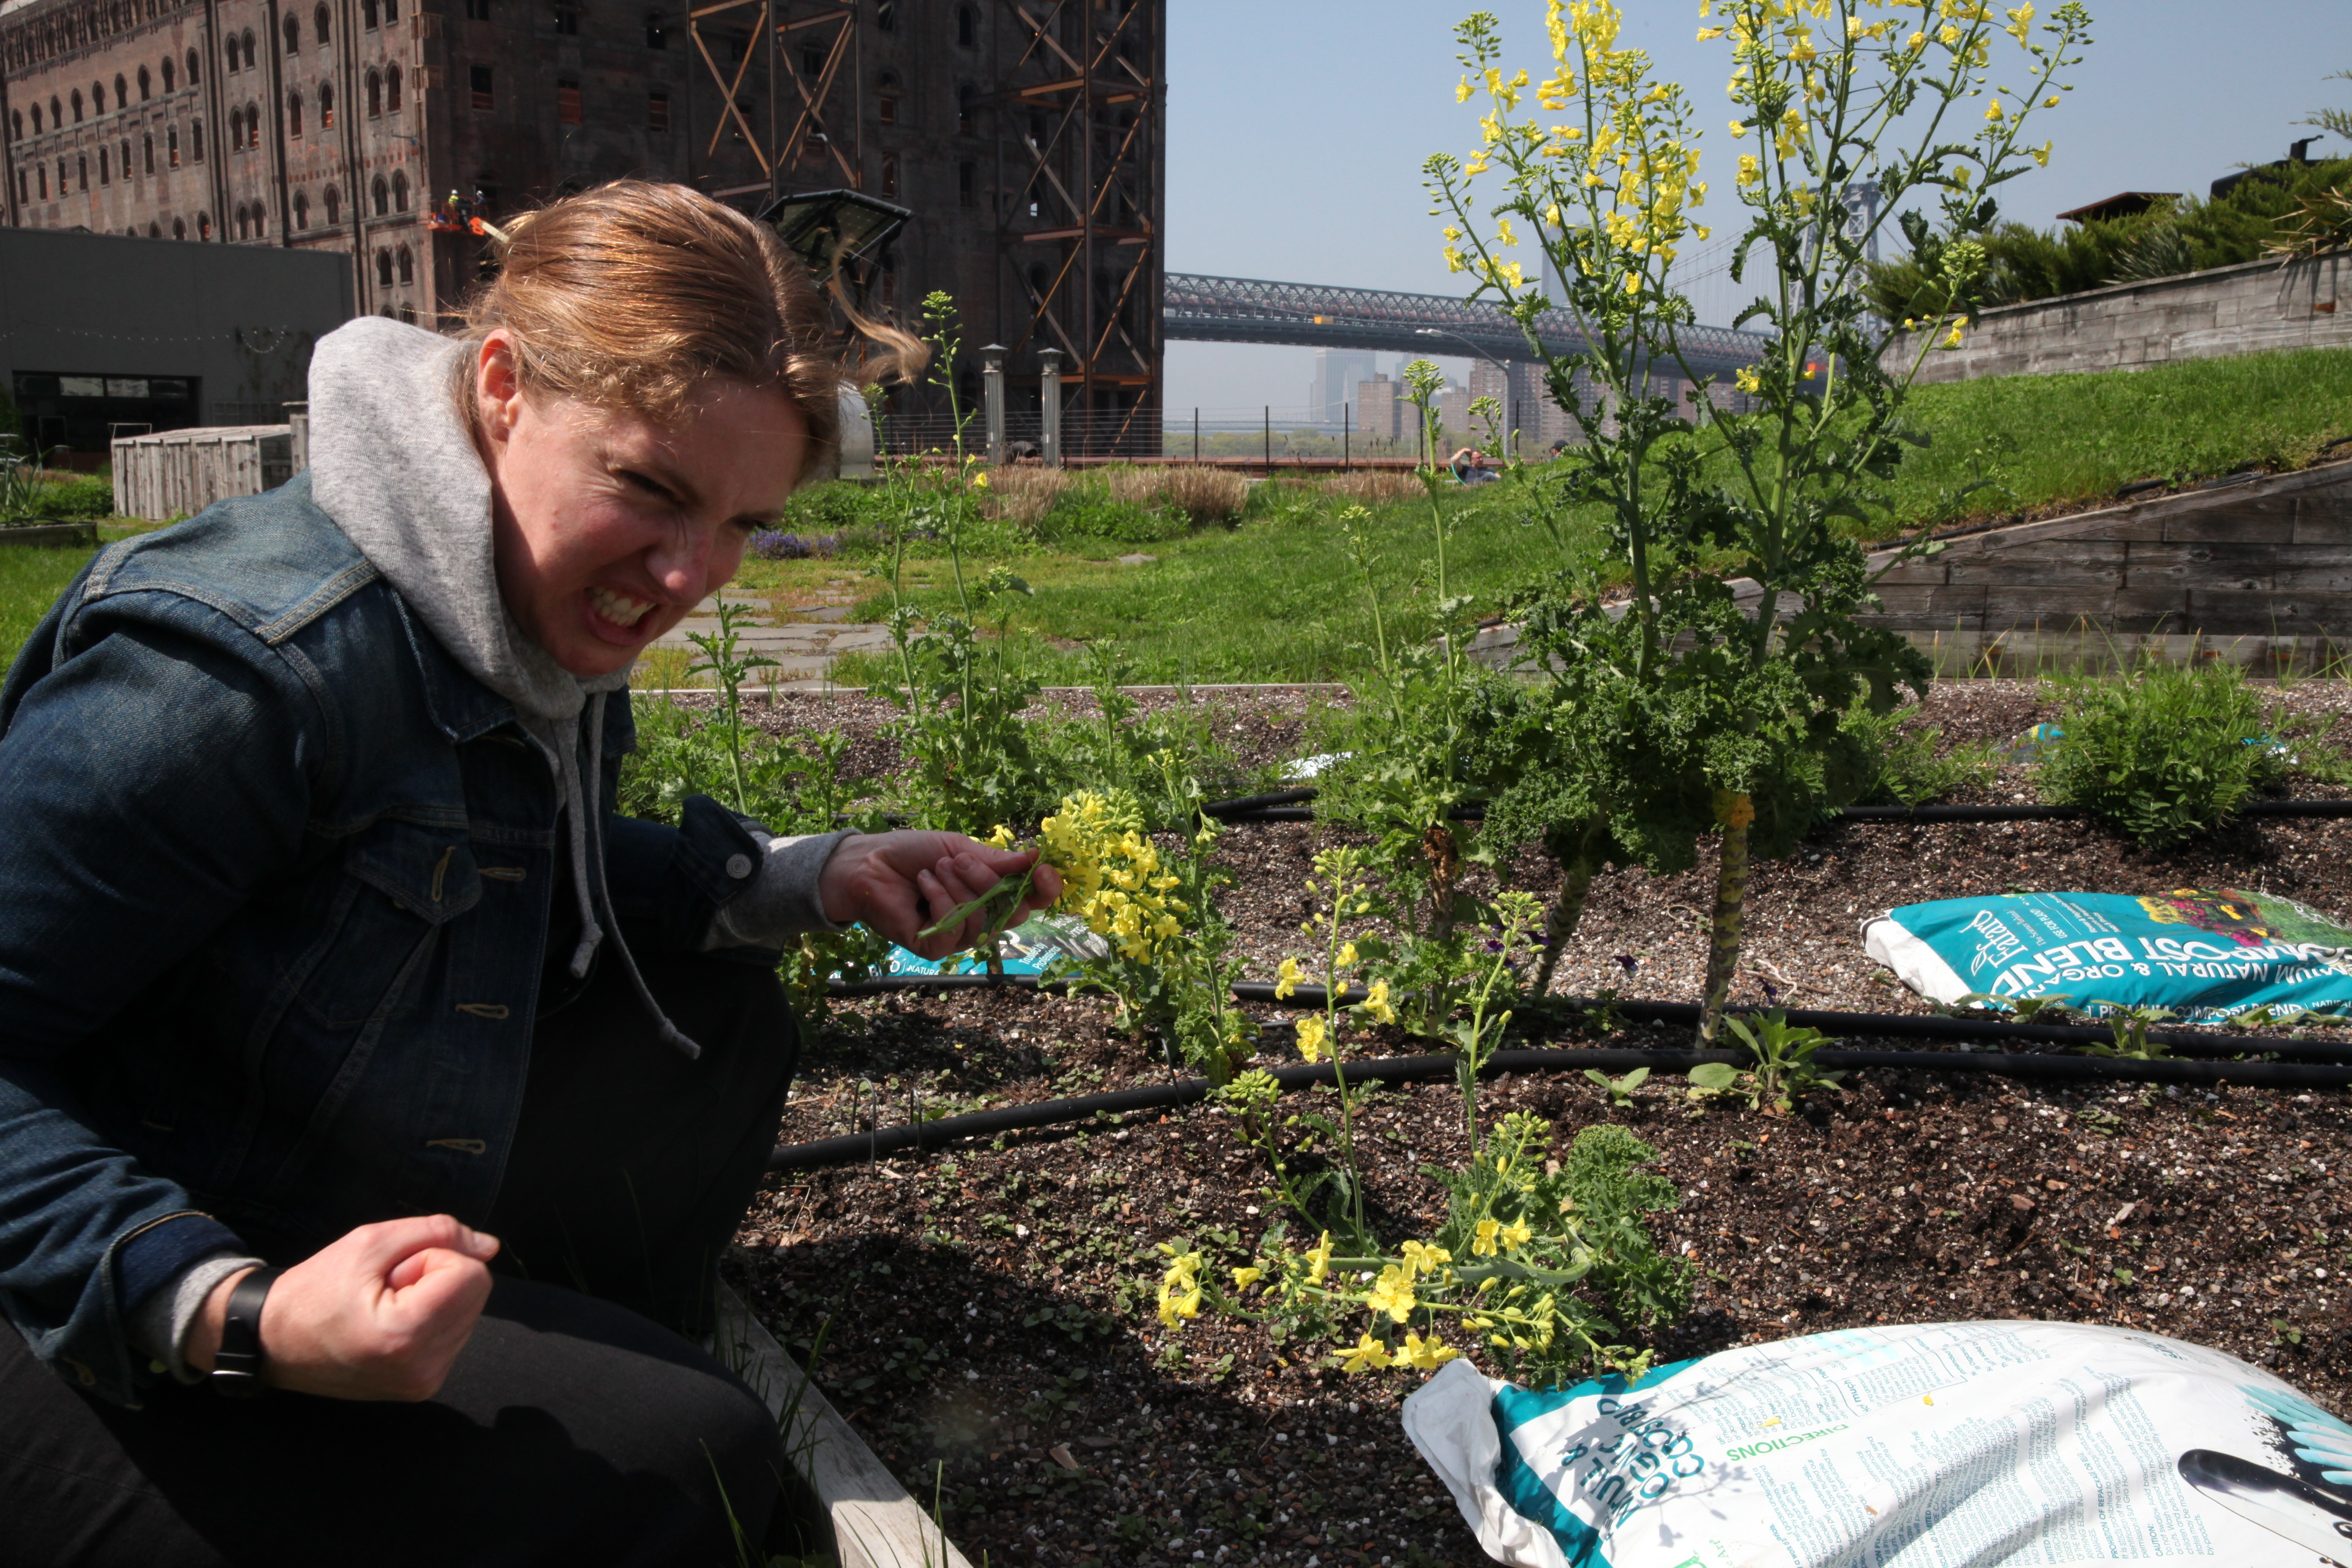 abra berens, chef at granor farm and author of the book ruffage, at the munchies roof garden to pick flowers and herbs